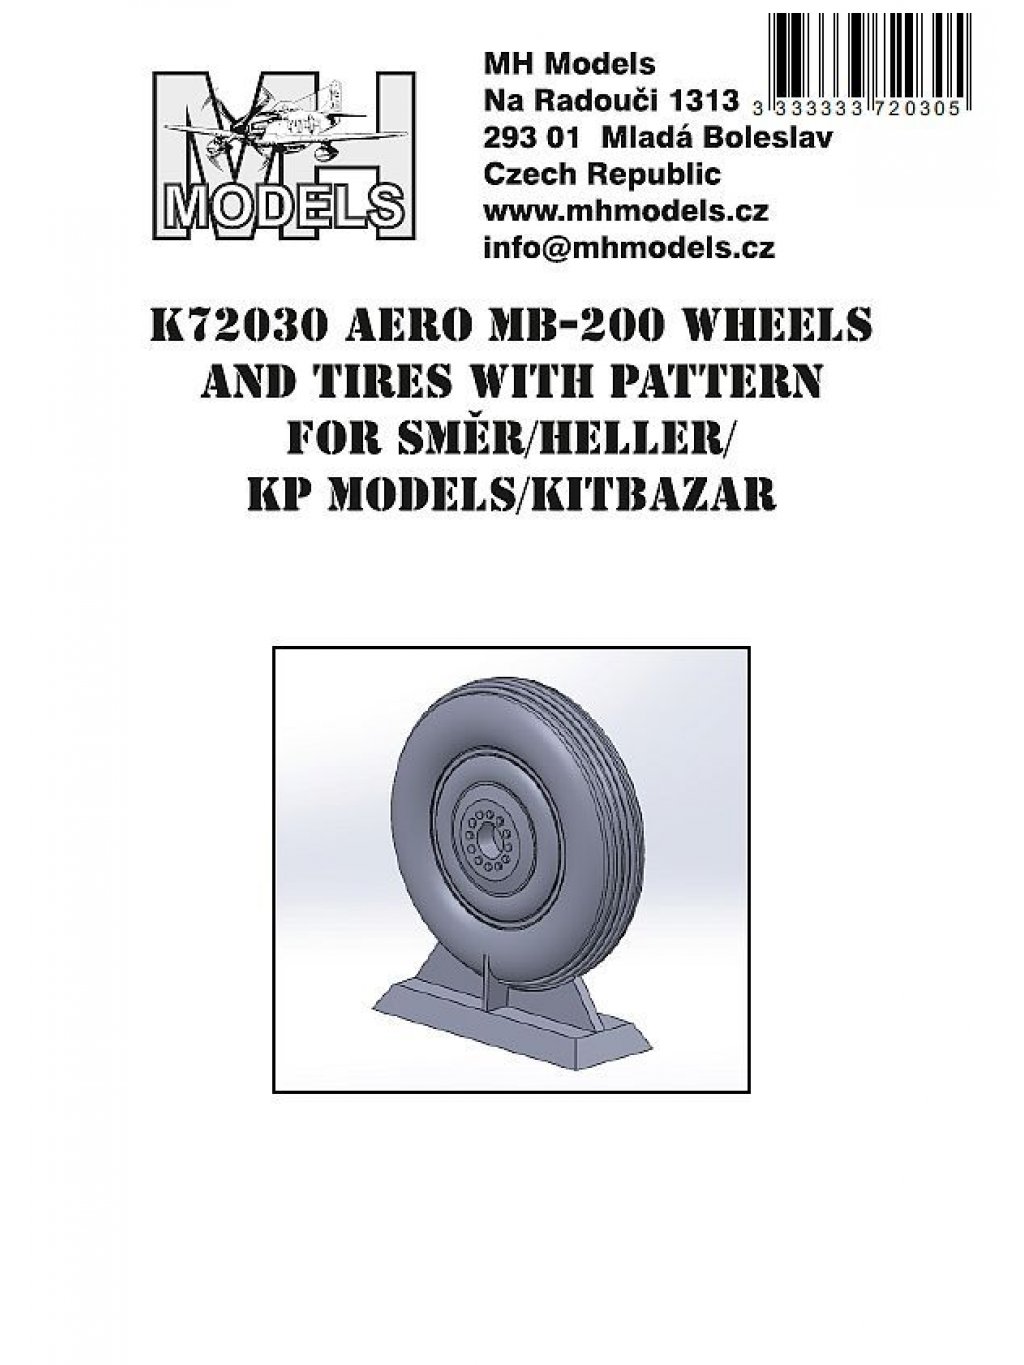 Aero MB-200 Wheels and tires with pattern for Směr/KP Models/Kitbazar